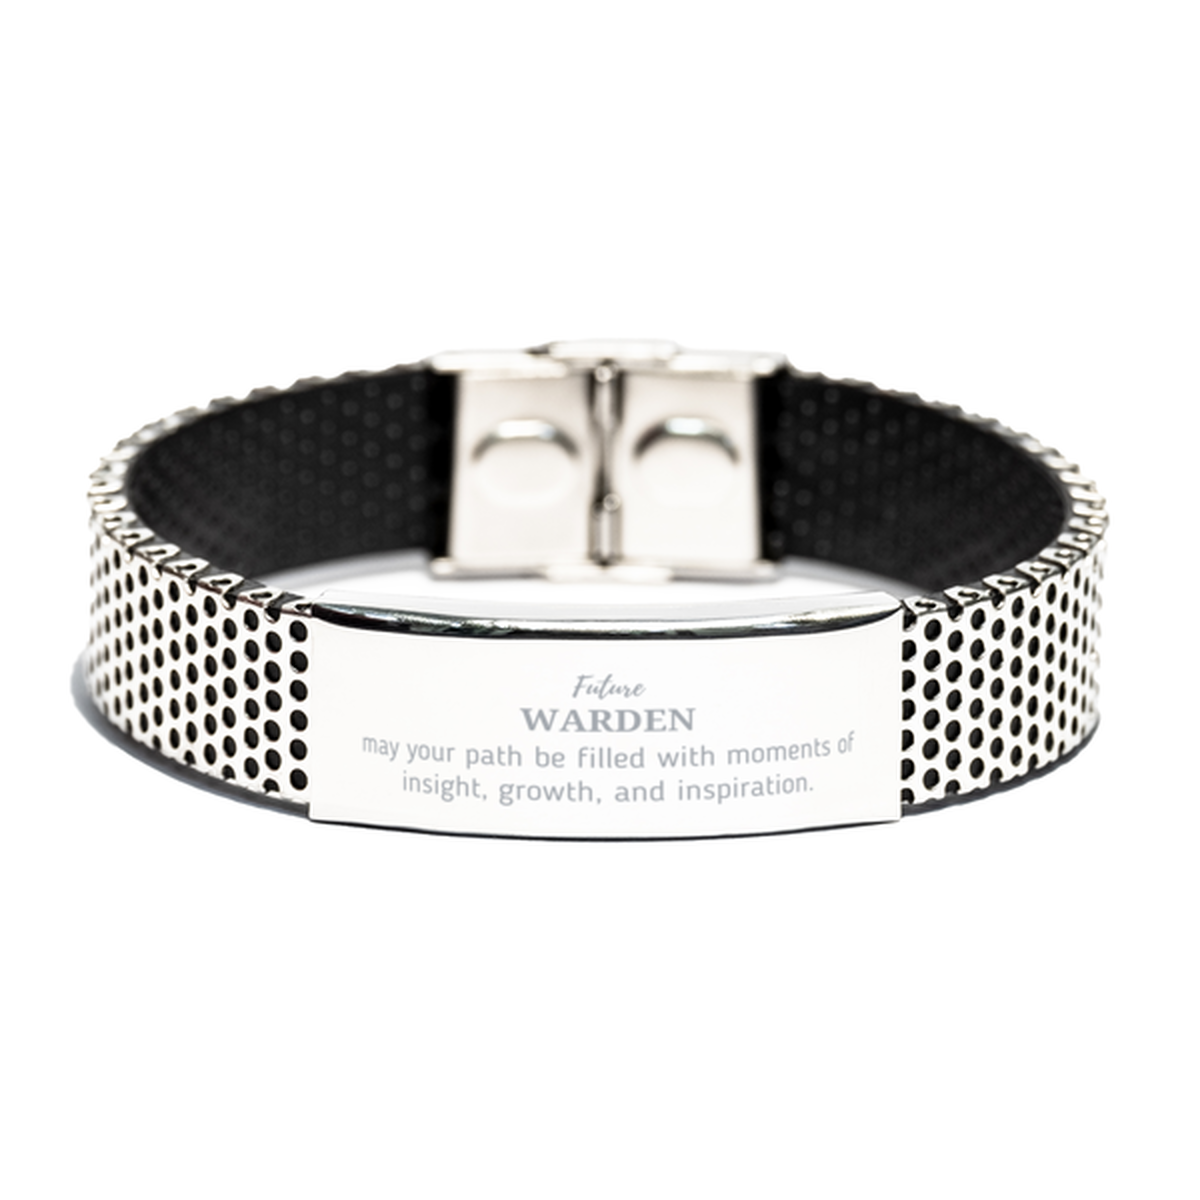 Future Warden Gifts, May your path be filled with moments of insight, Graduation Gifts for New Warden, Christmas Unique Stainless Steel Bracelet For Men, Women, Friends